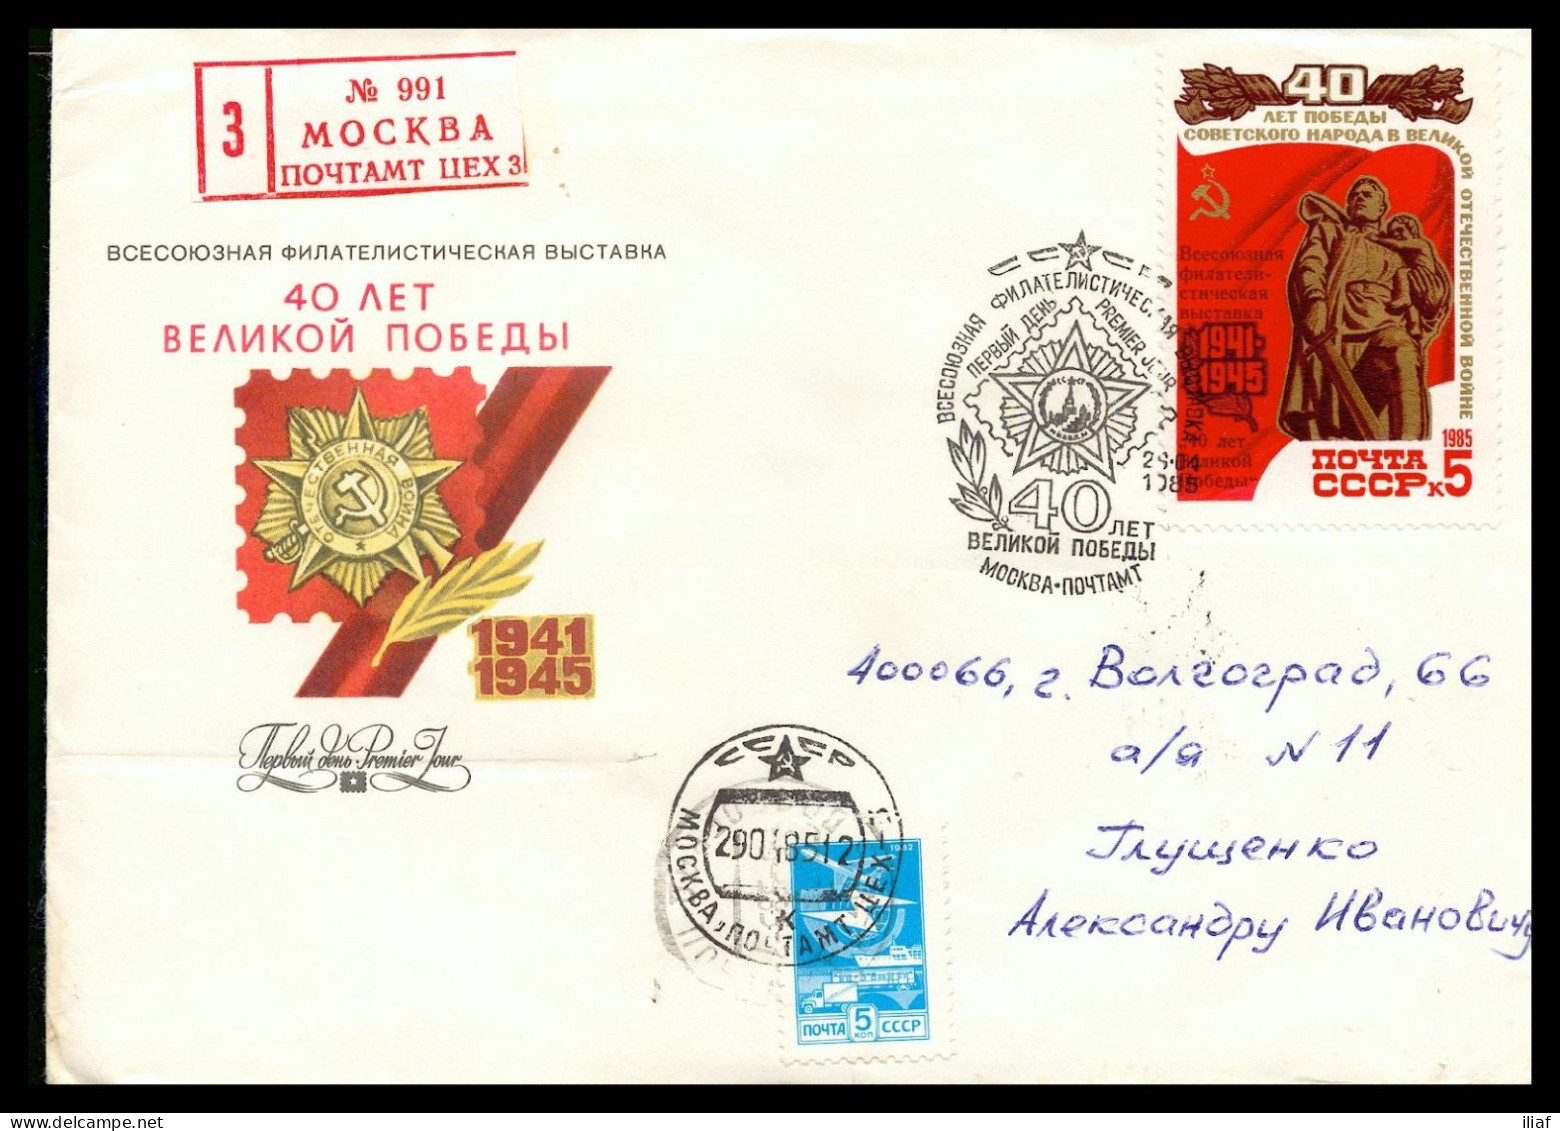 RUSSIA & USSR All Union Philatelic Exhibition 40 Years Victory In II WW FDC Envelope With FDC Cancellation Special Over - Philatelic Exhibitions